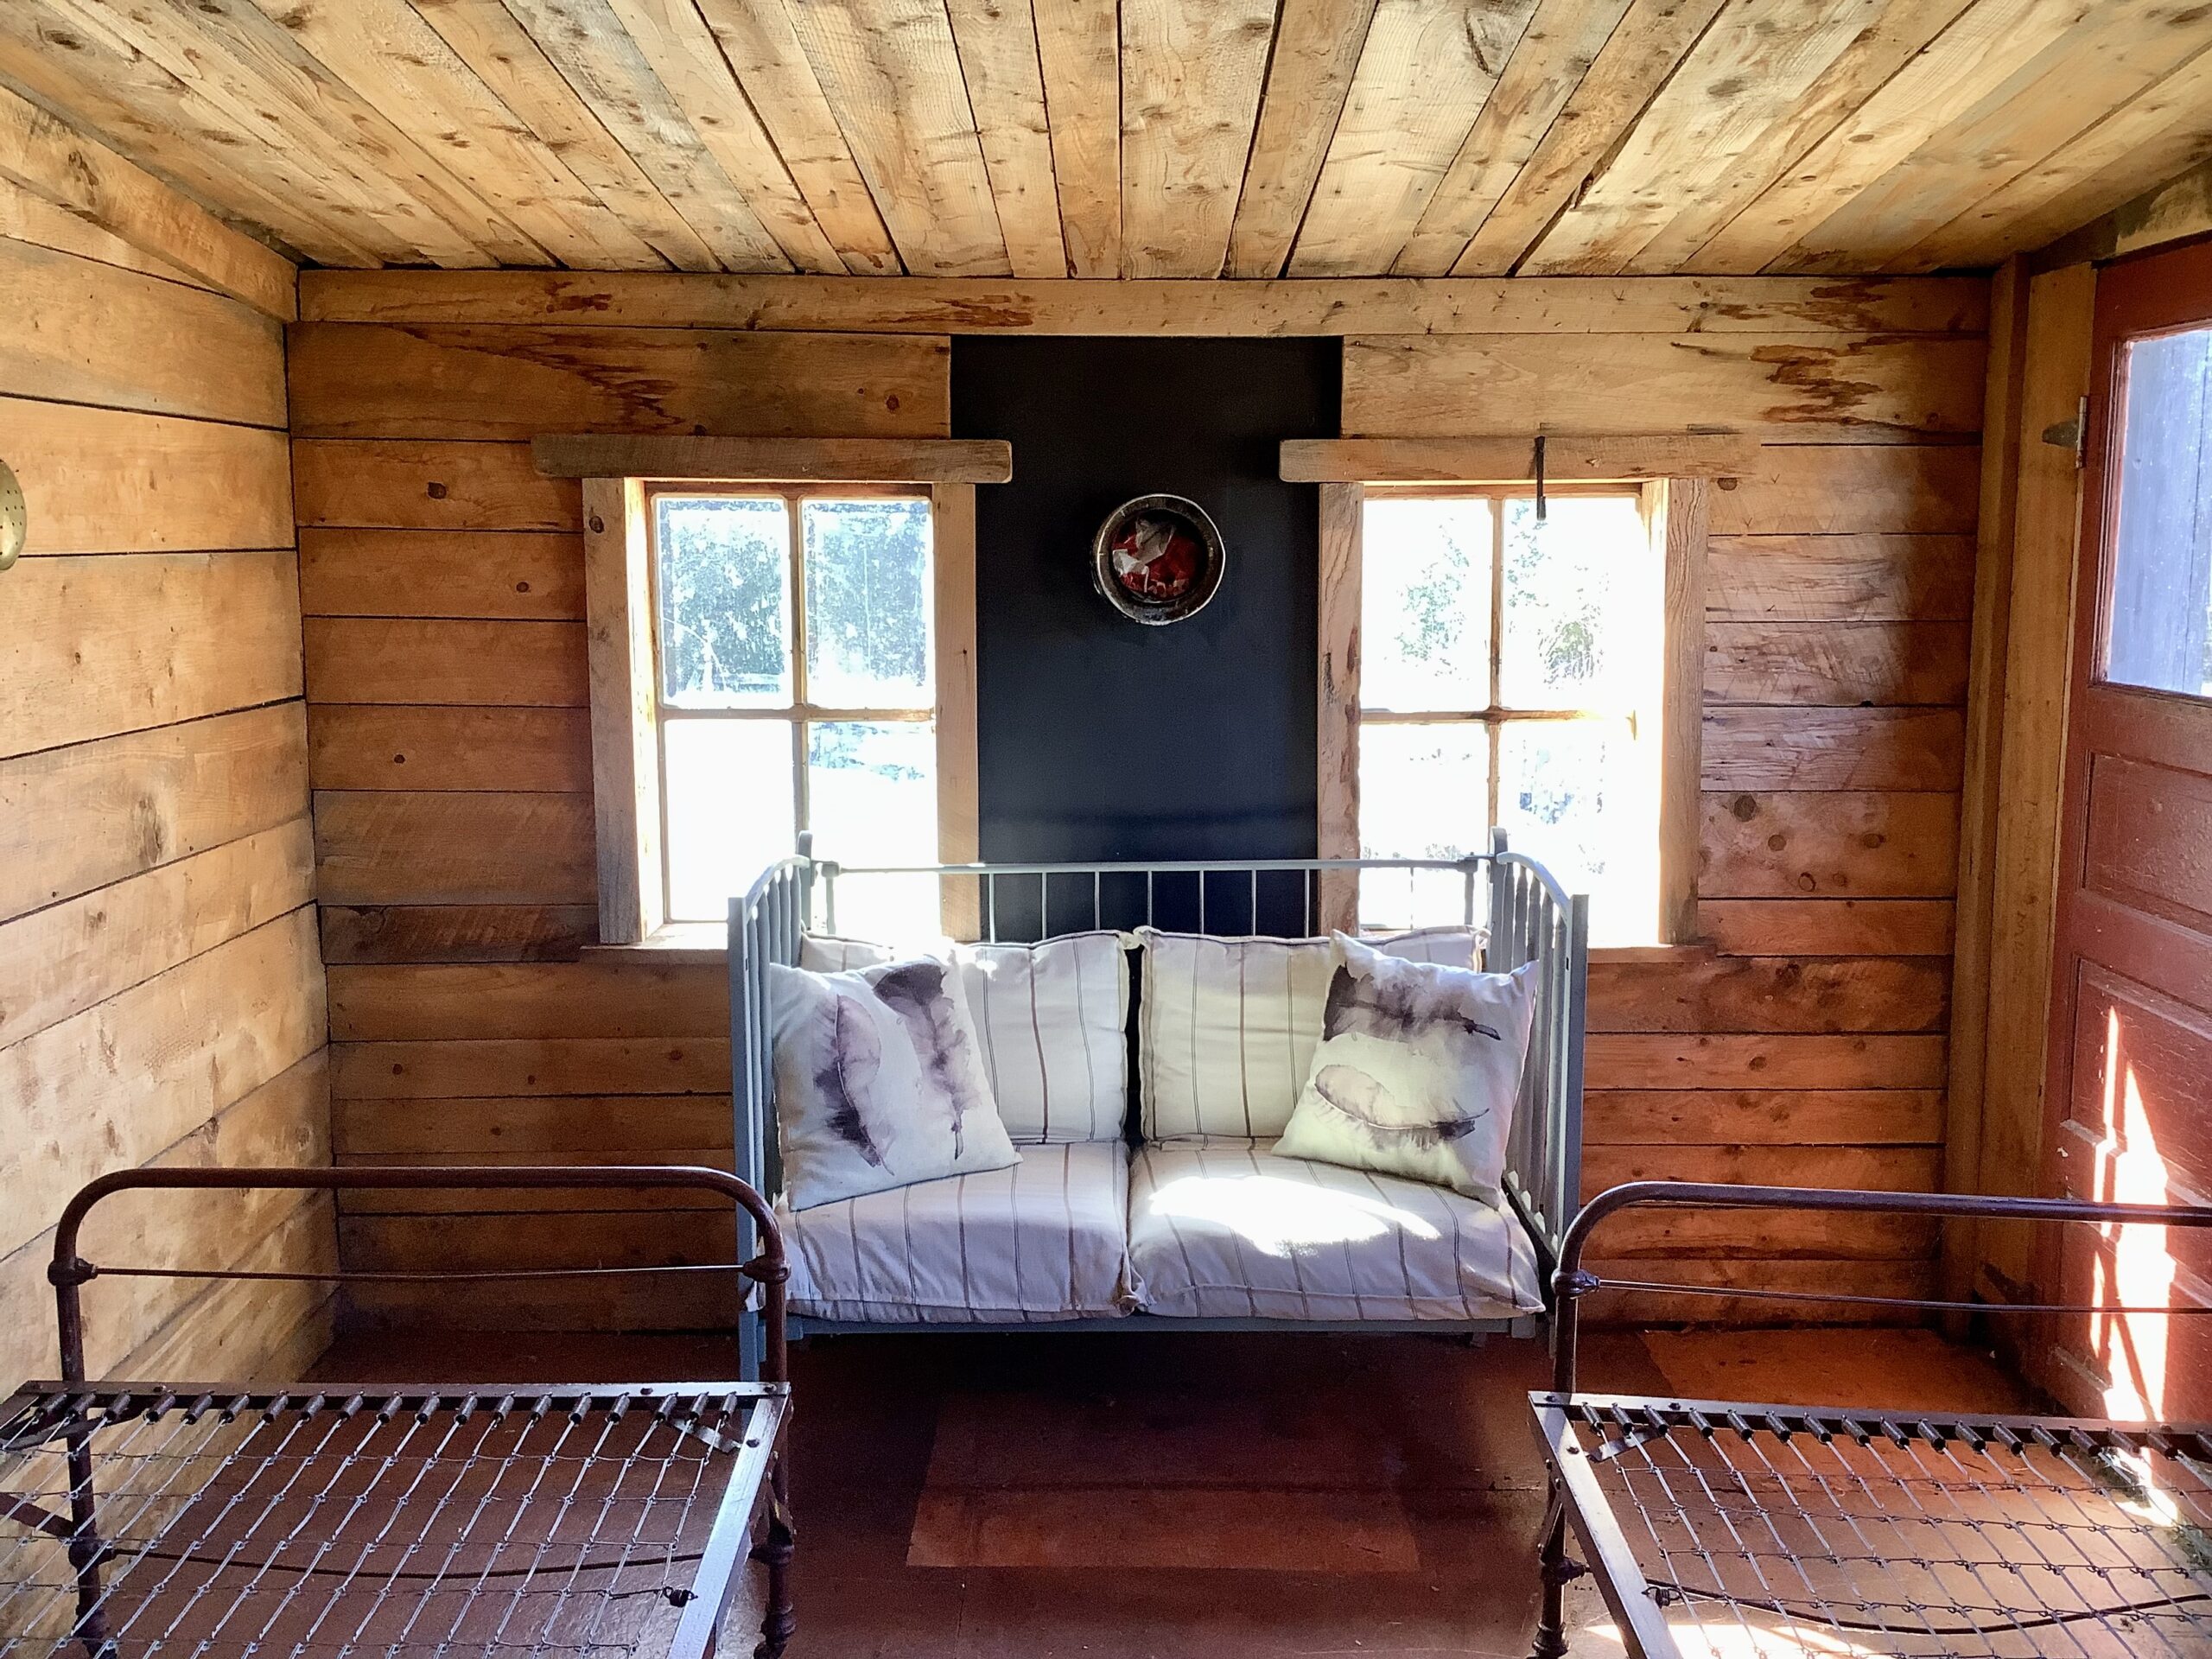 Interior of a small, rustic wooden bunkie with two empty metal bed frames, two windows, and a small couch.